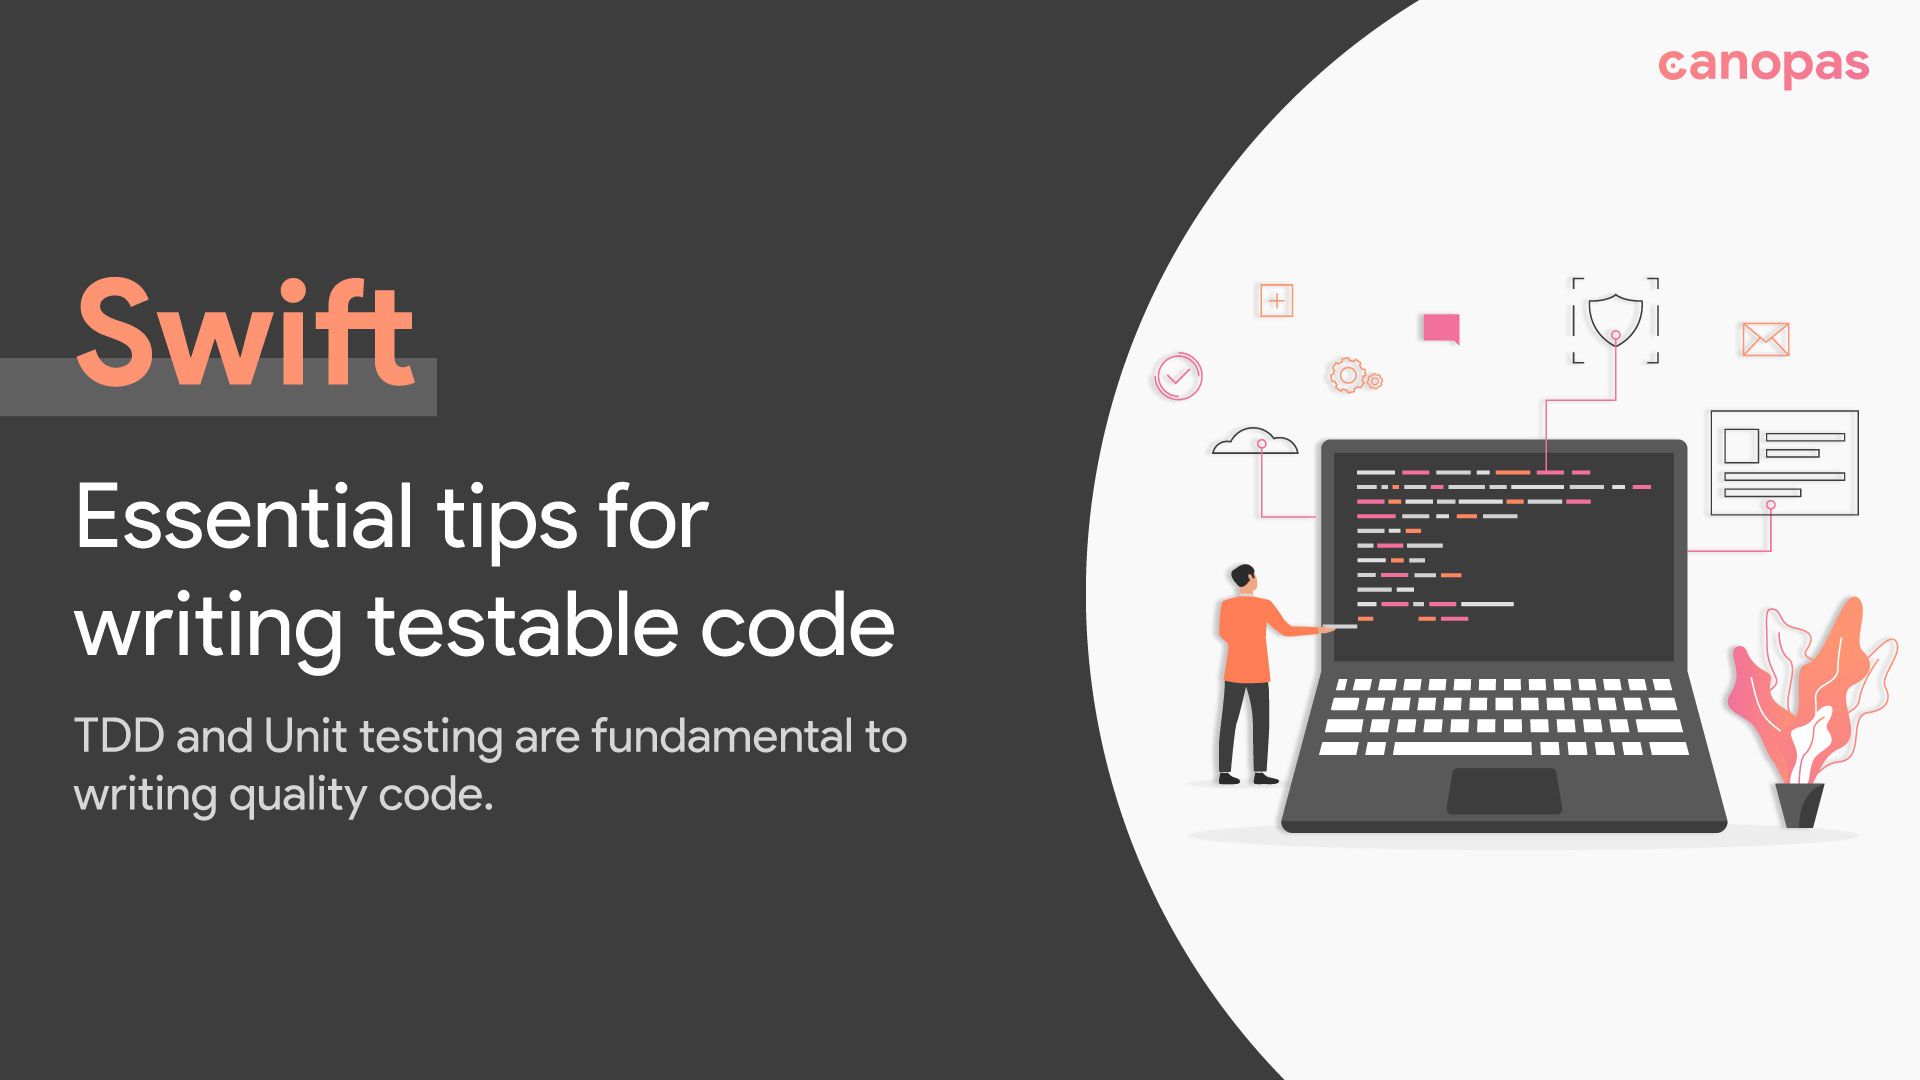 Swift — Essential tips for writing testable code